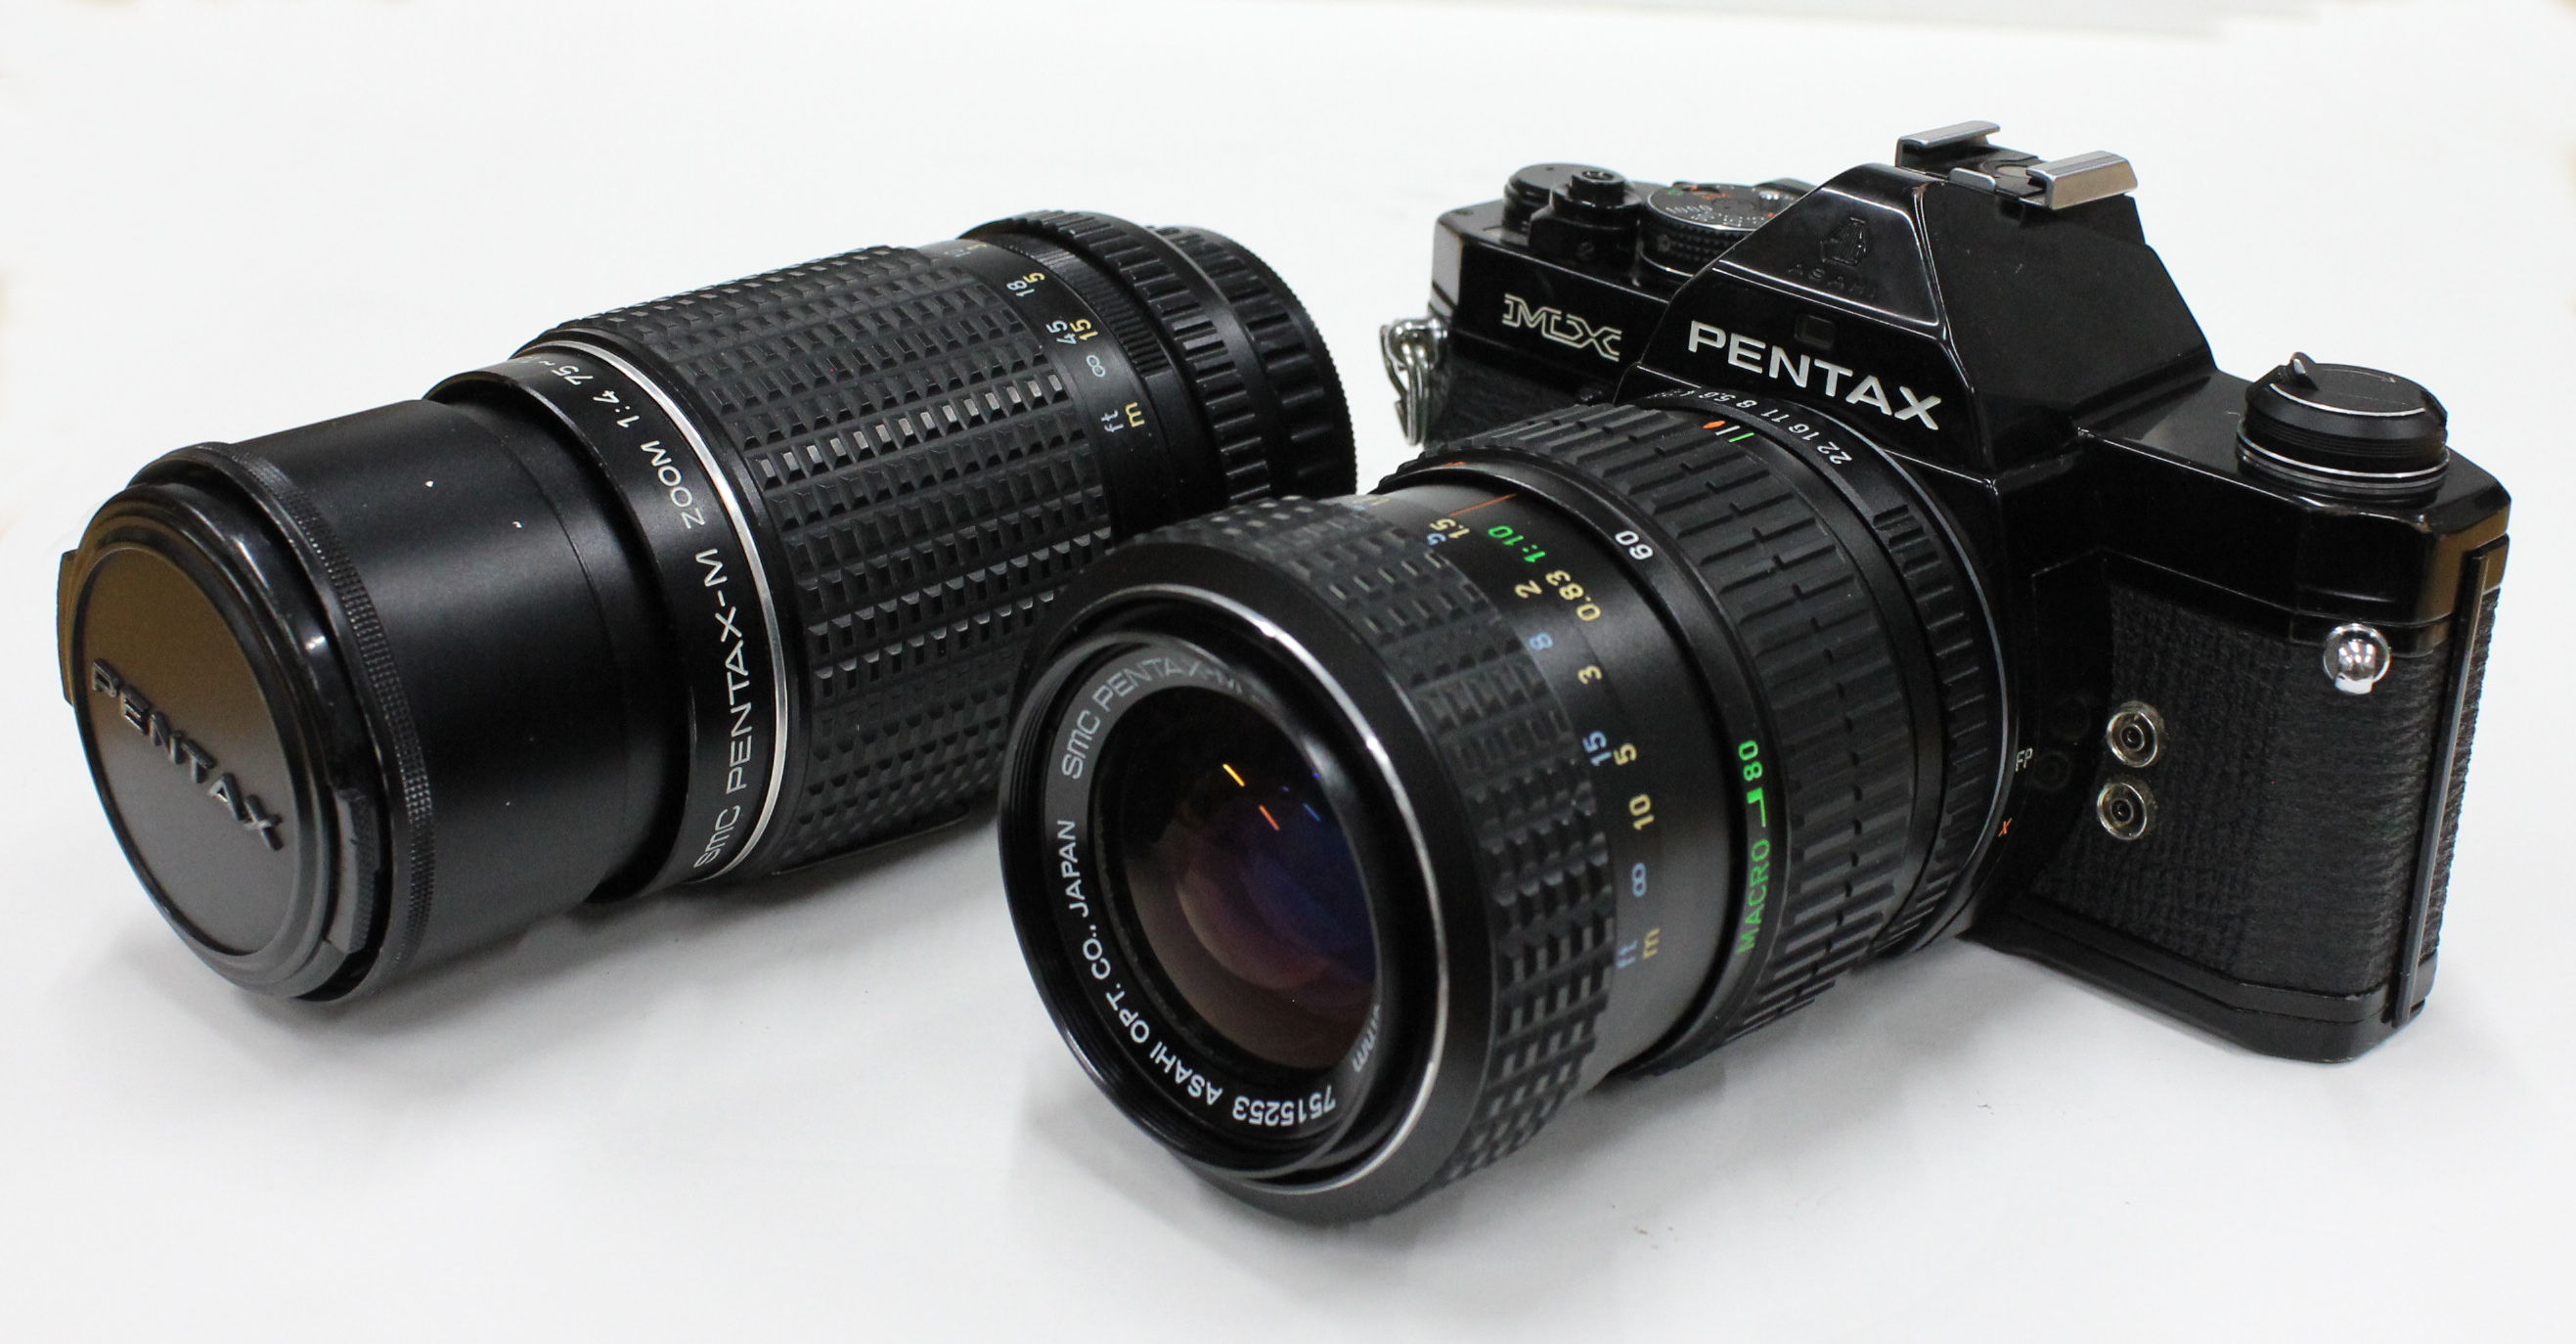 Japan Used Camera Shop | [Excellent++++] Pentax MX with SMC Pentax-M 40-80mm F/2.8-4 & 75-150mm F/4 Lens